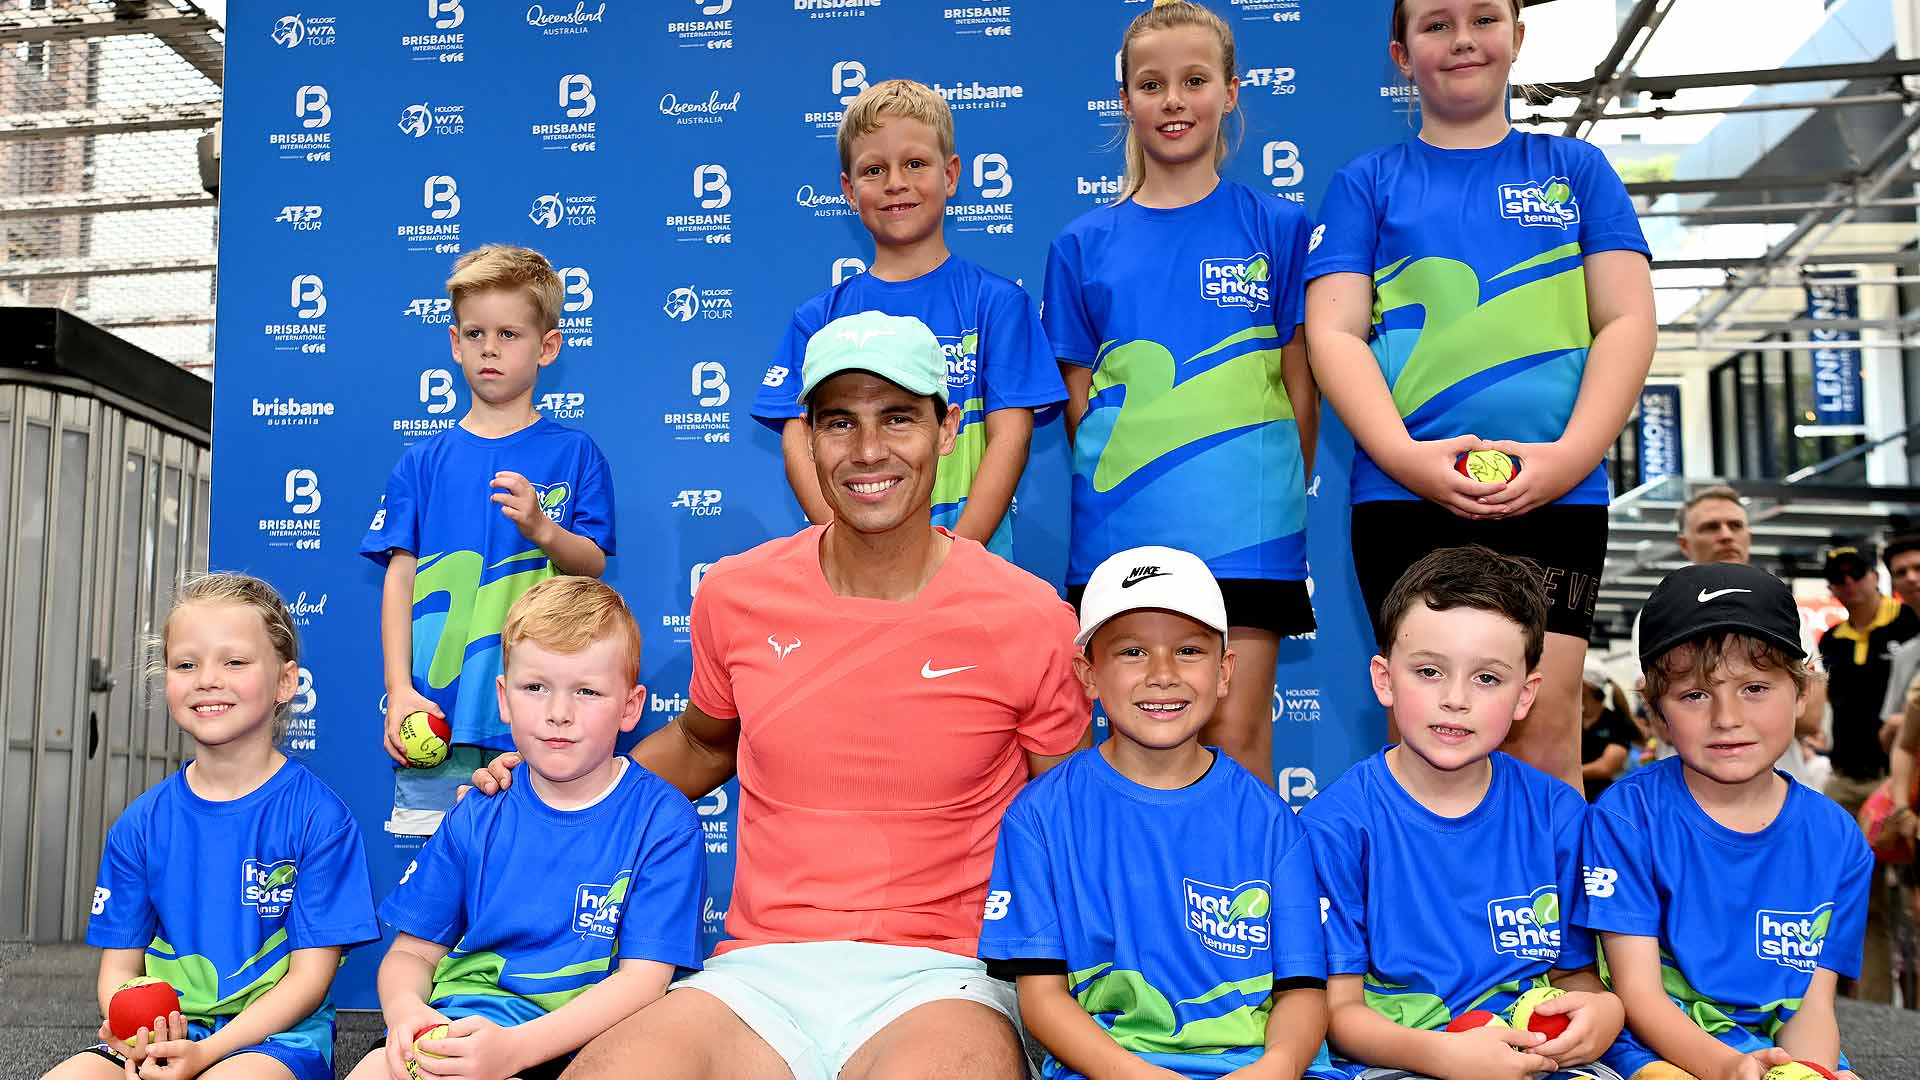 Rafael Nadal is competing in both singles and doubles at the Brisbane International presented by Evie.